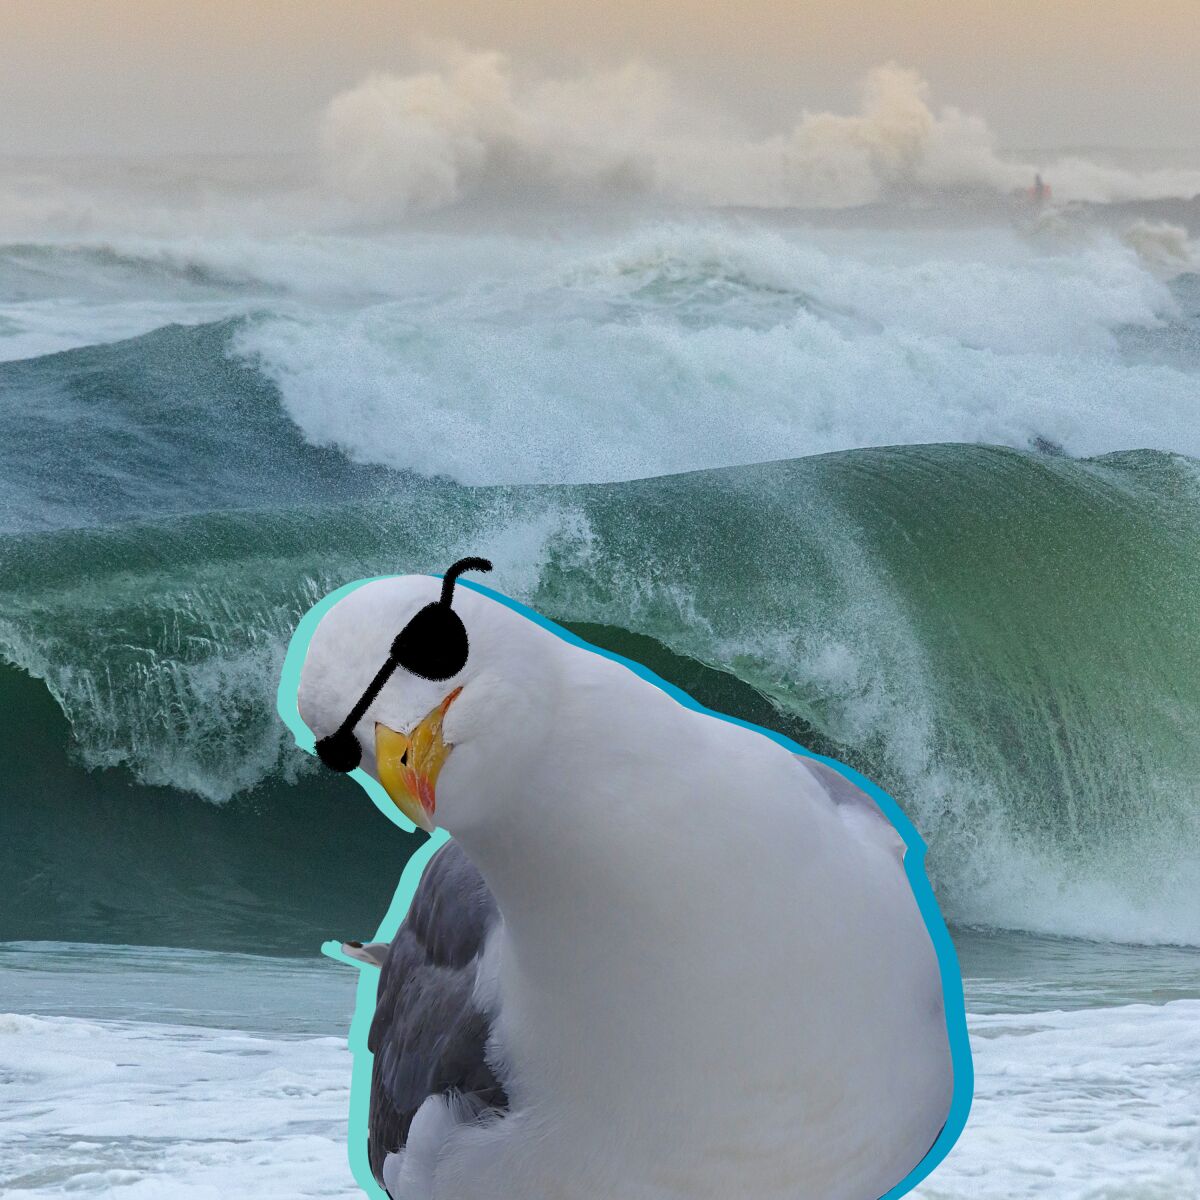 A Western gull has on sunglasses in a photo illustration.